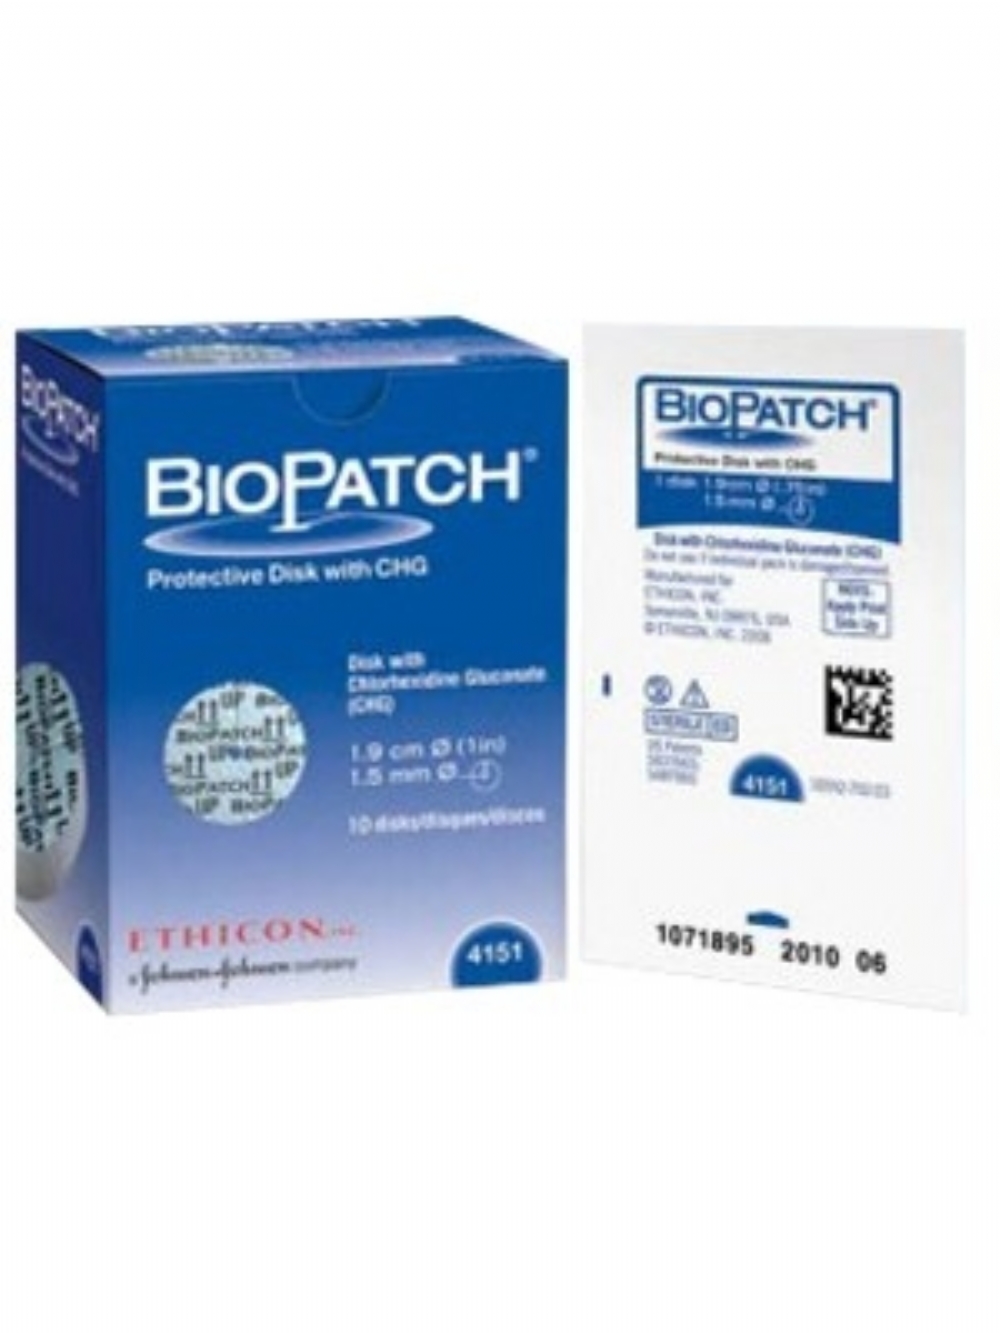 BIOPATCH PROTECTIVE DISK